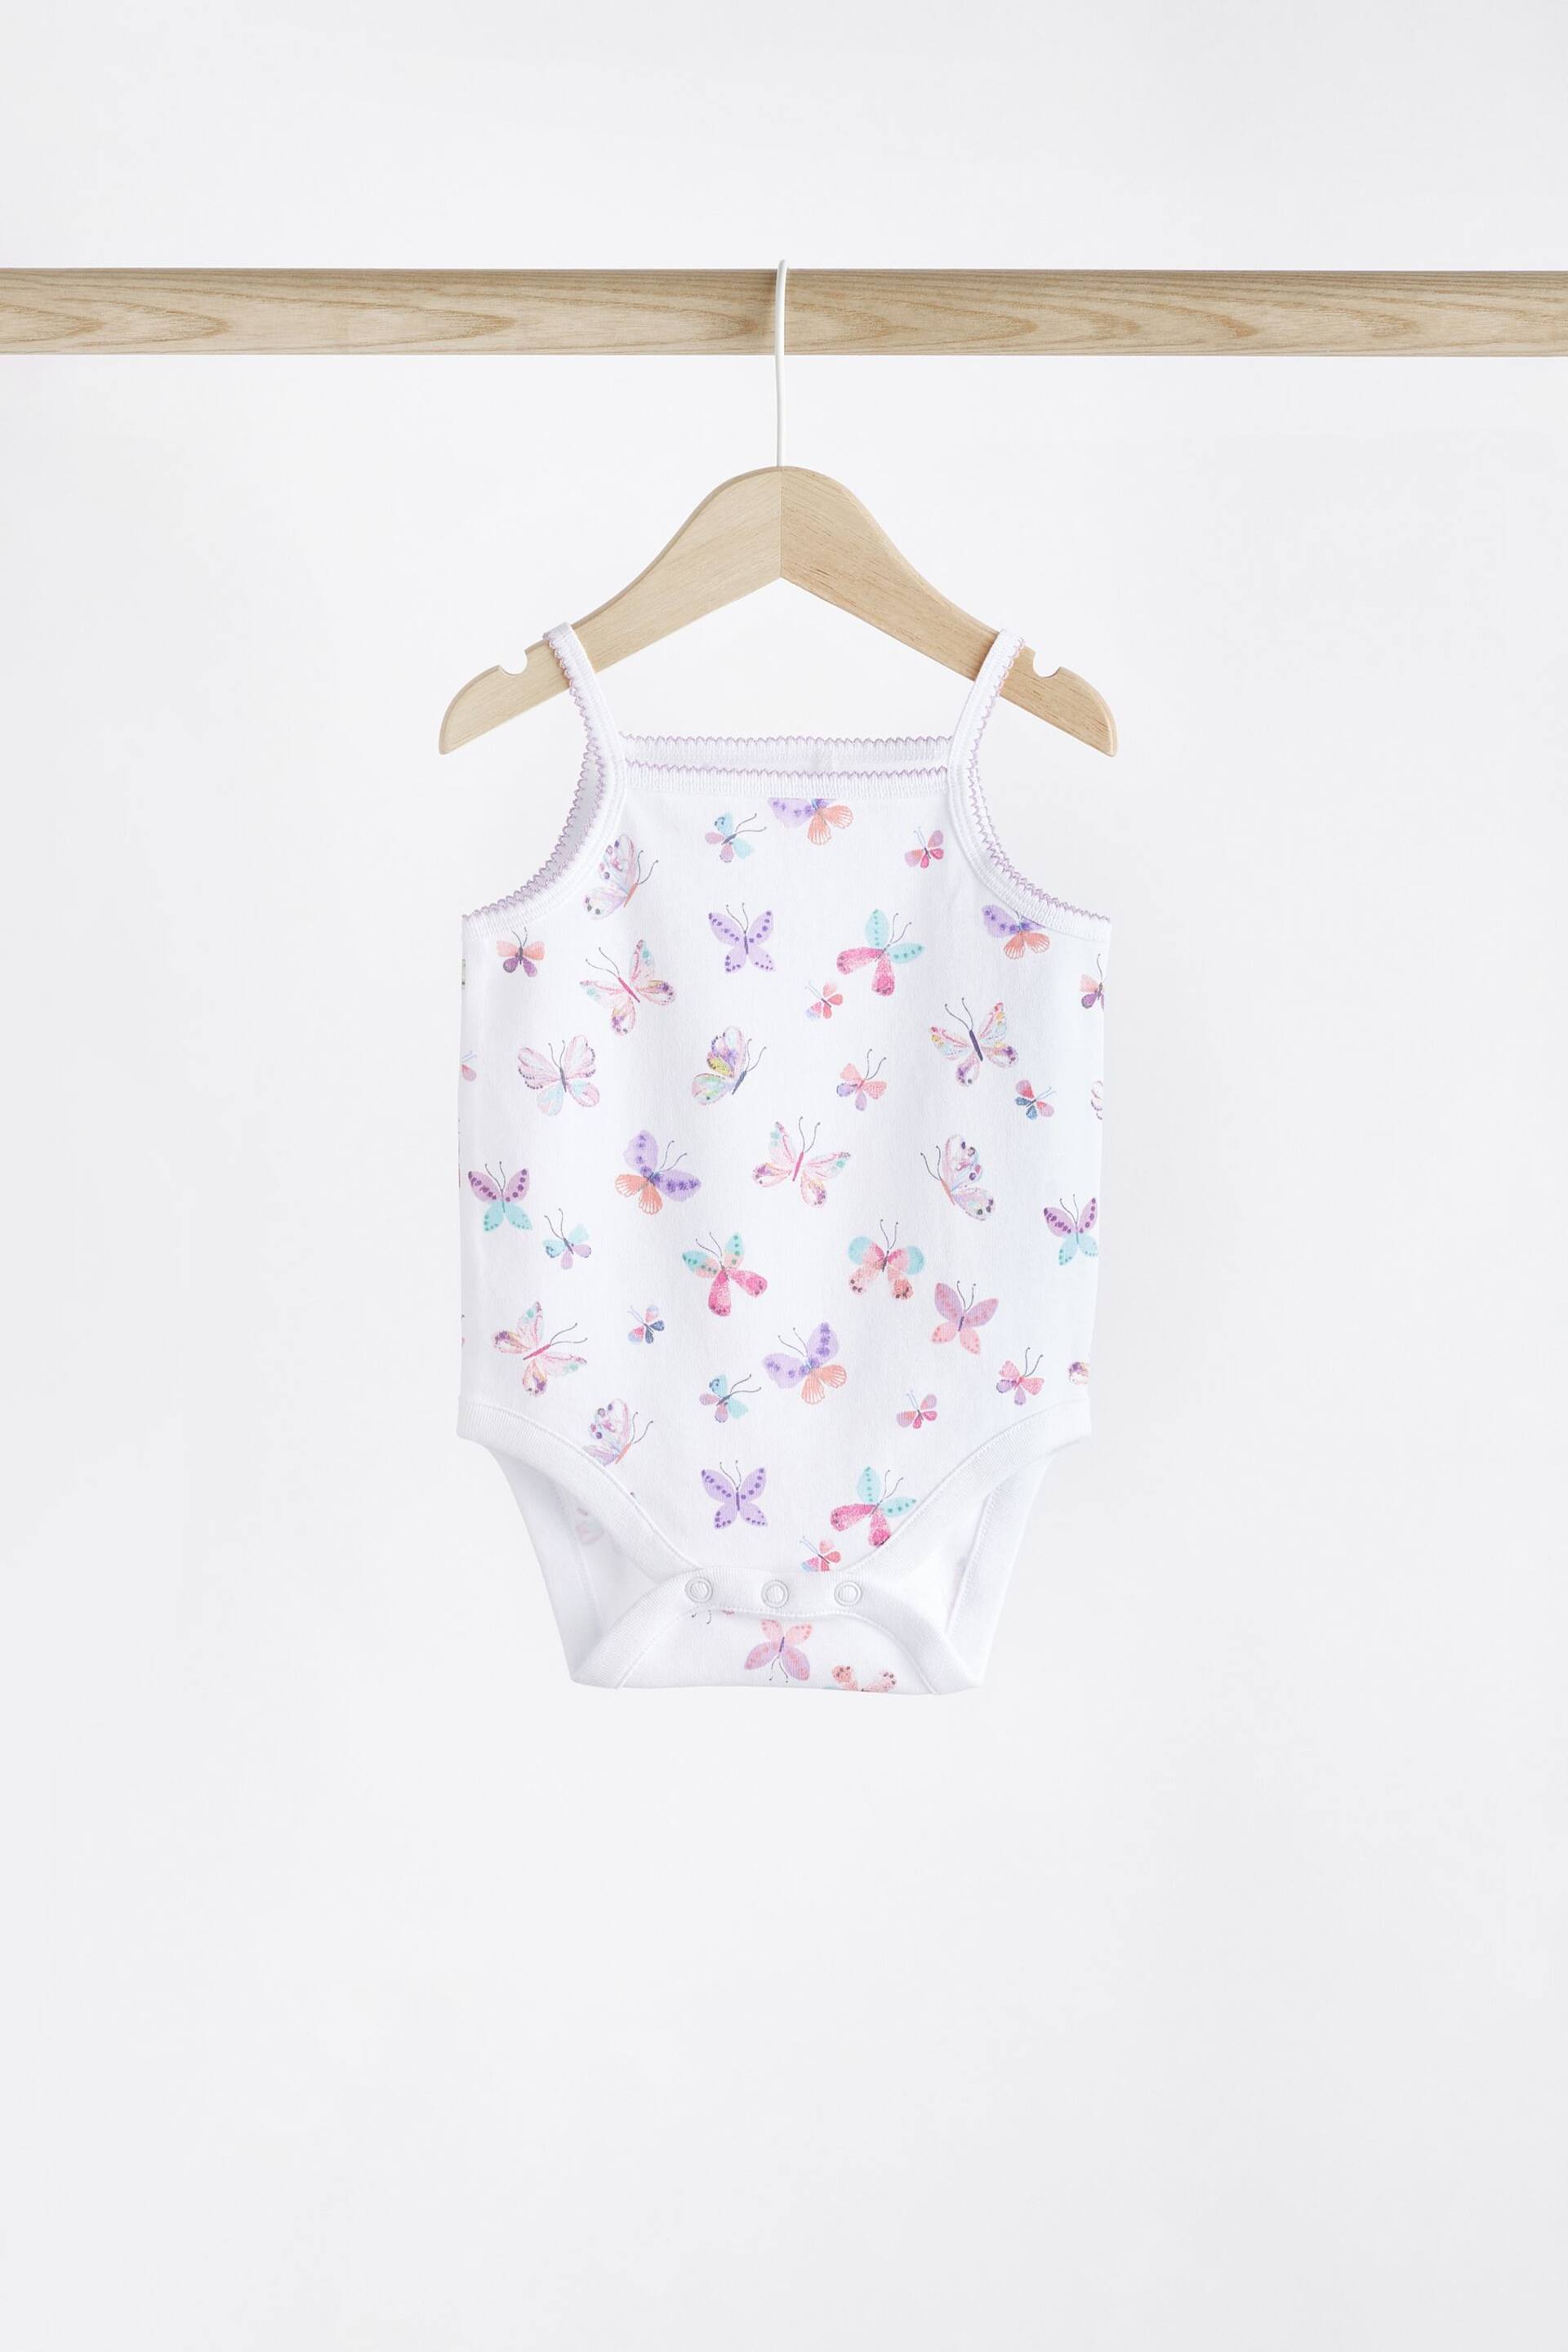 White Fairy Baby Strappy Vest Bodysuits 5 Pack - Image 7 of 12